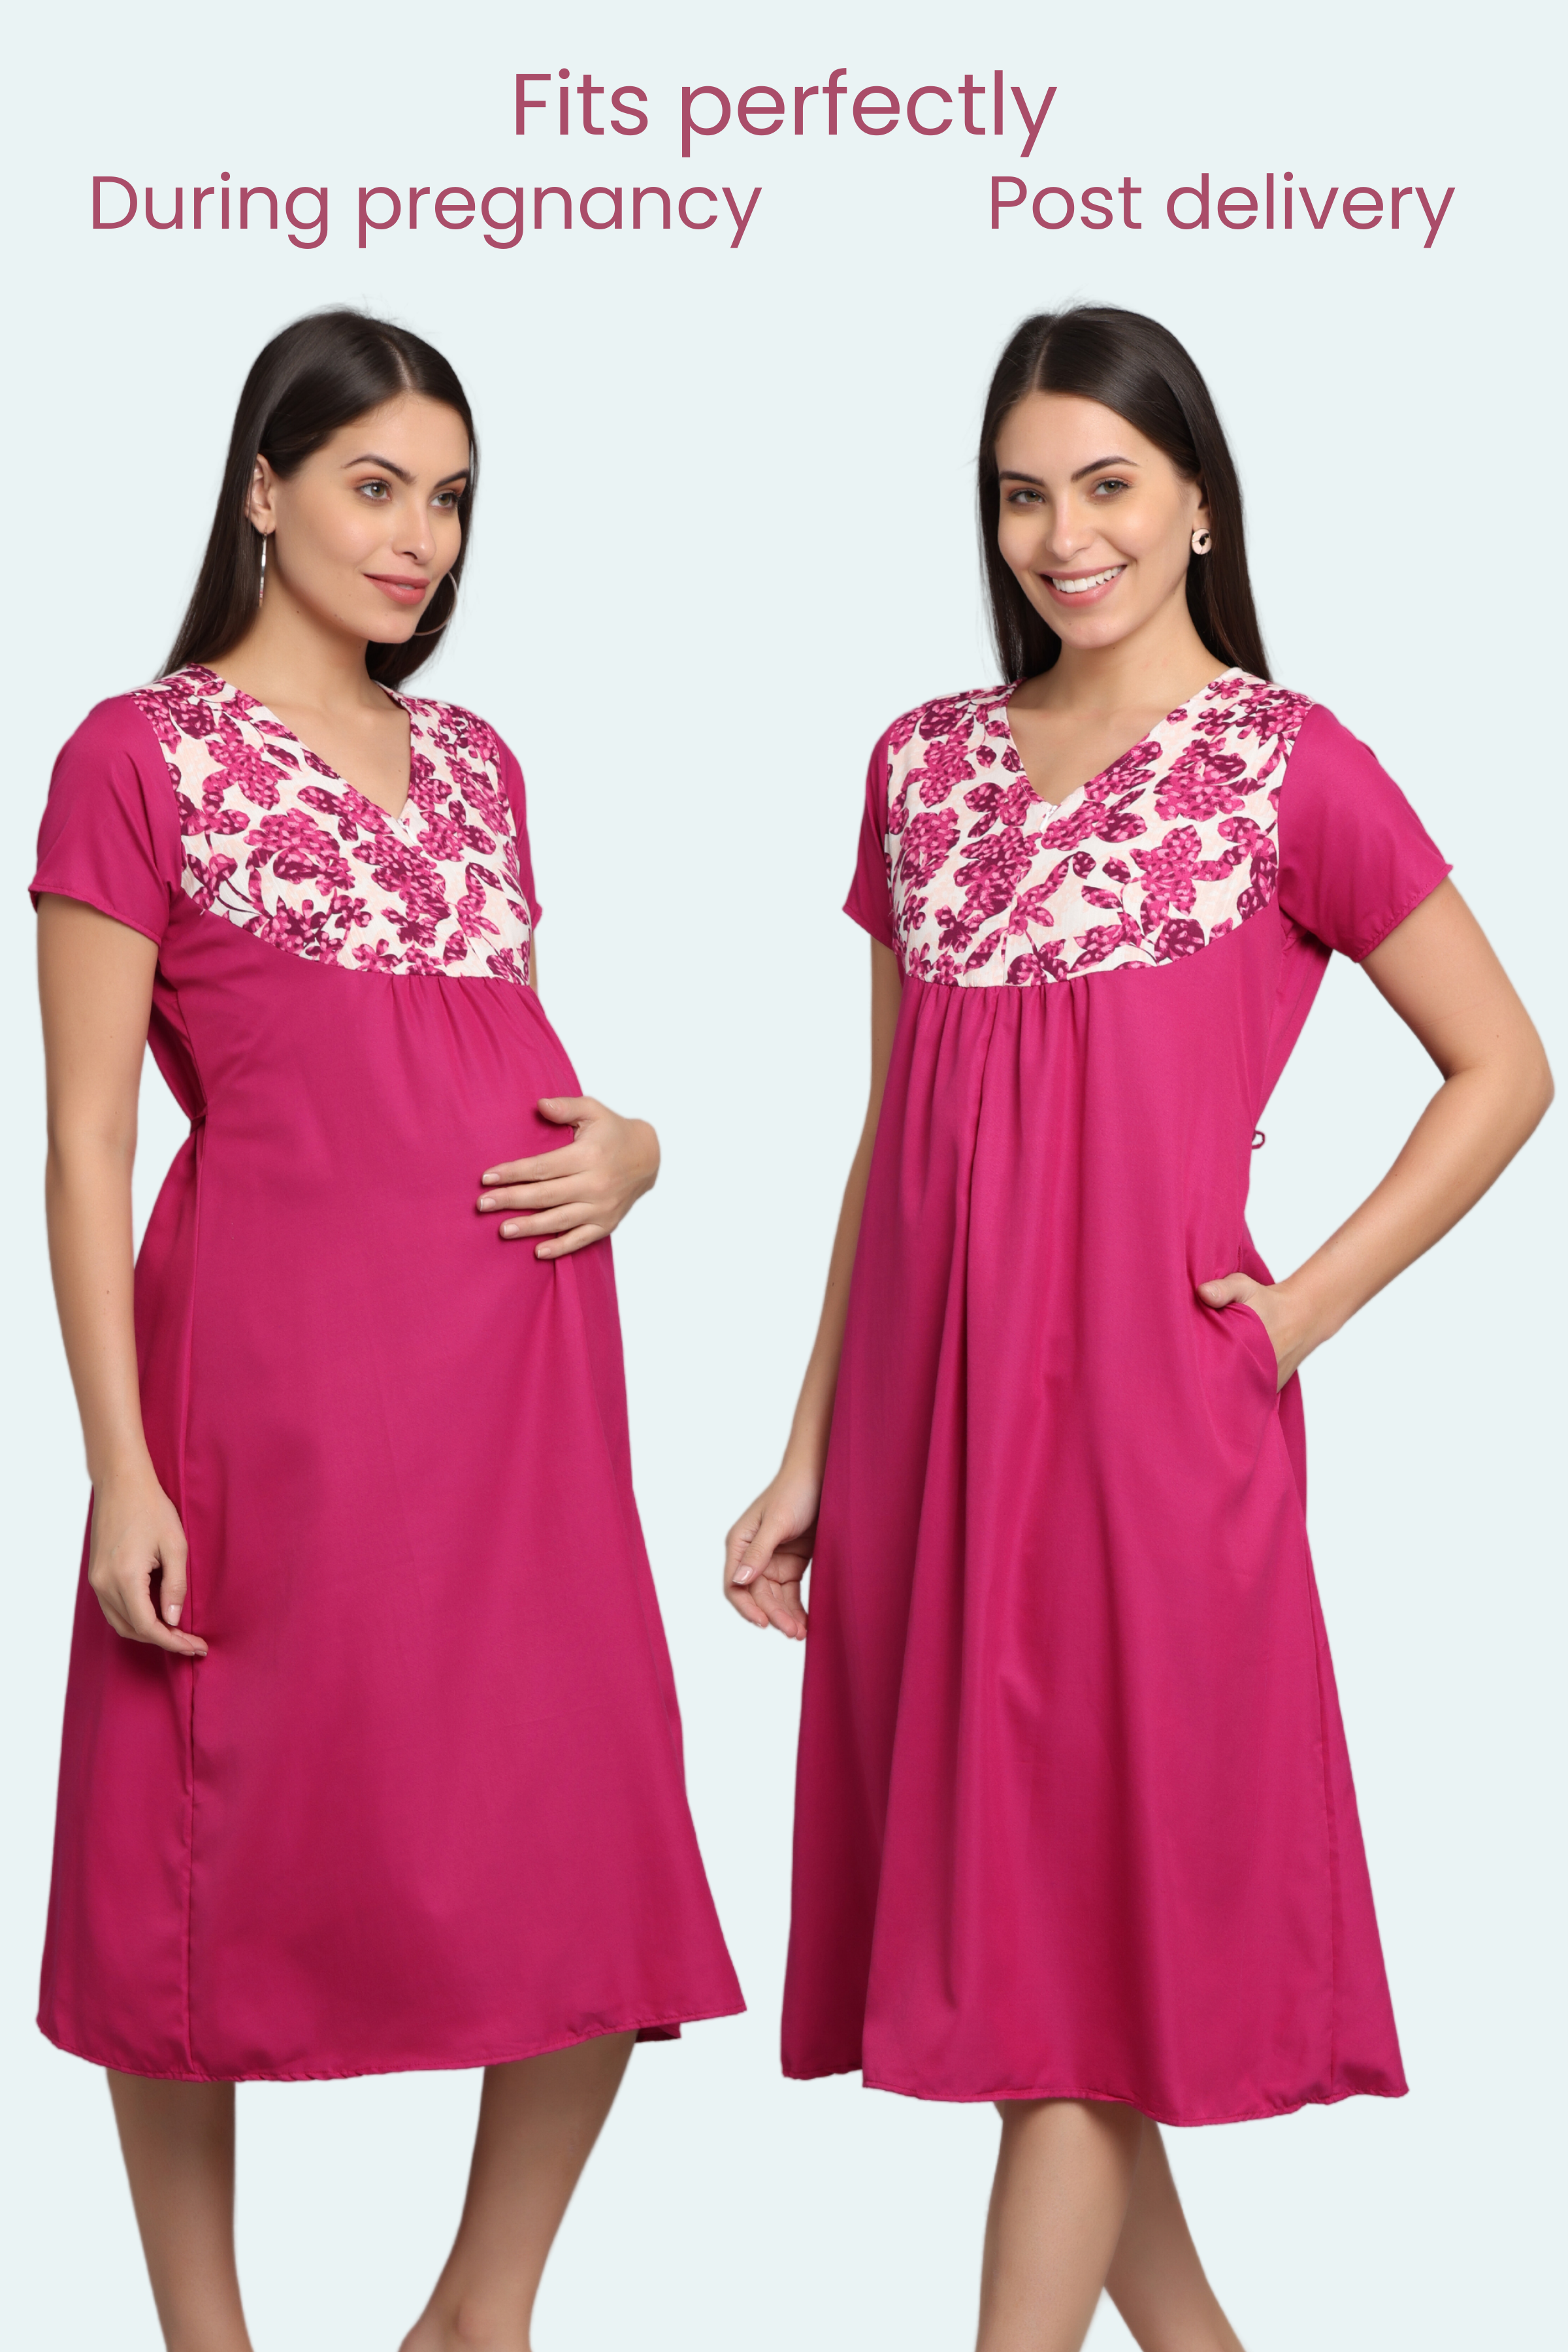 Buy King Store hub Women's Maternity Dress with Side Zipper and Breast Feeding  Dress for Pregnant Ladies (BlackM) at Amazon.in